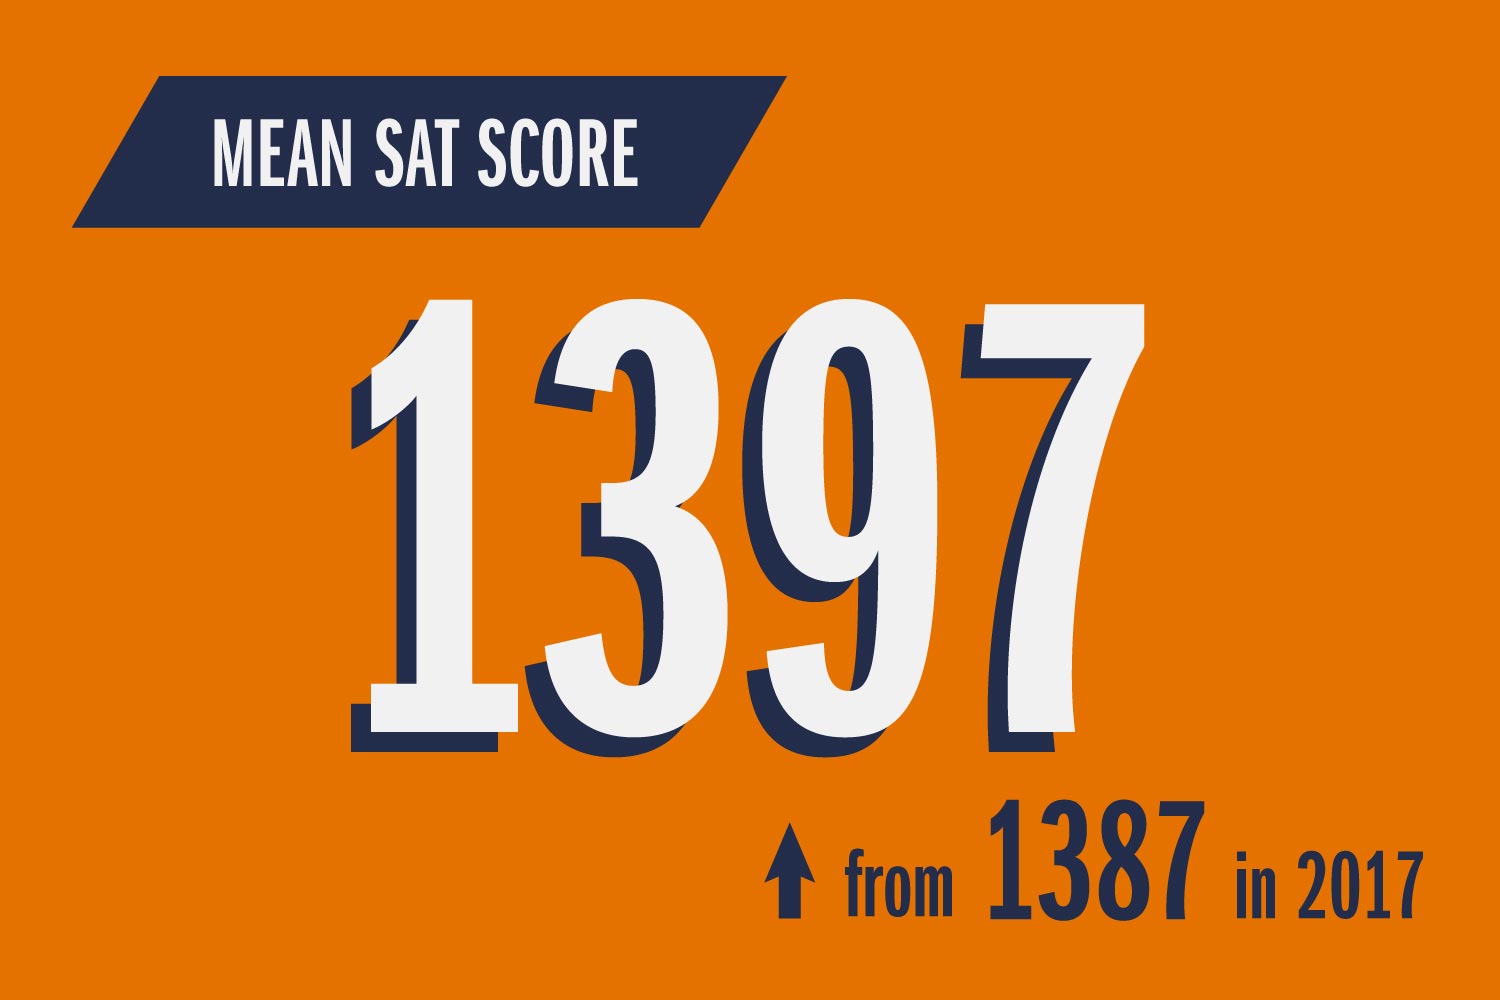 Text reads: Mean SAT Score 1397 up from 1387 in 2017